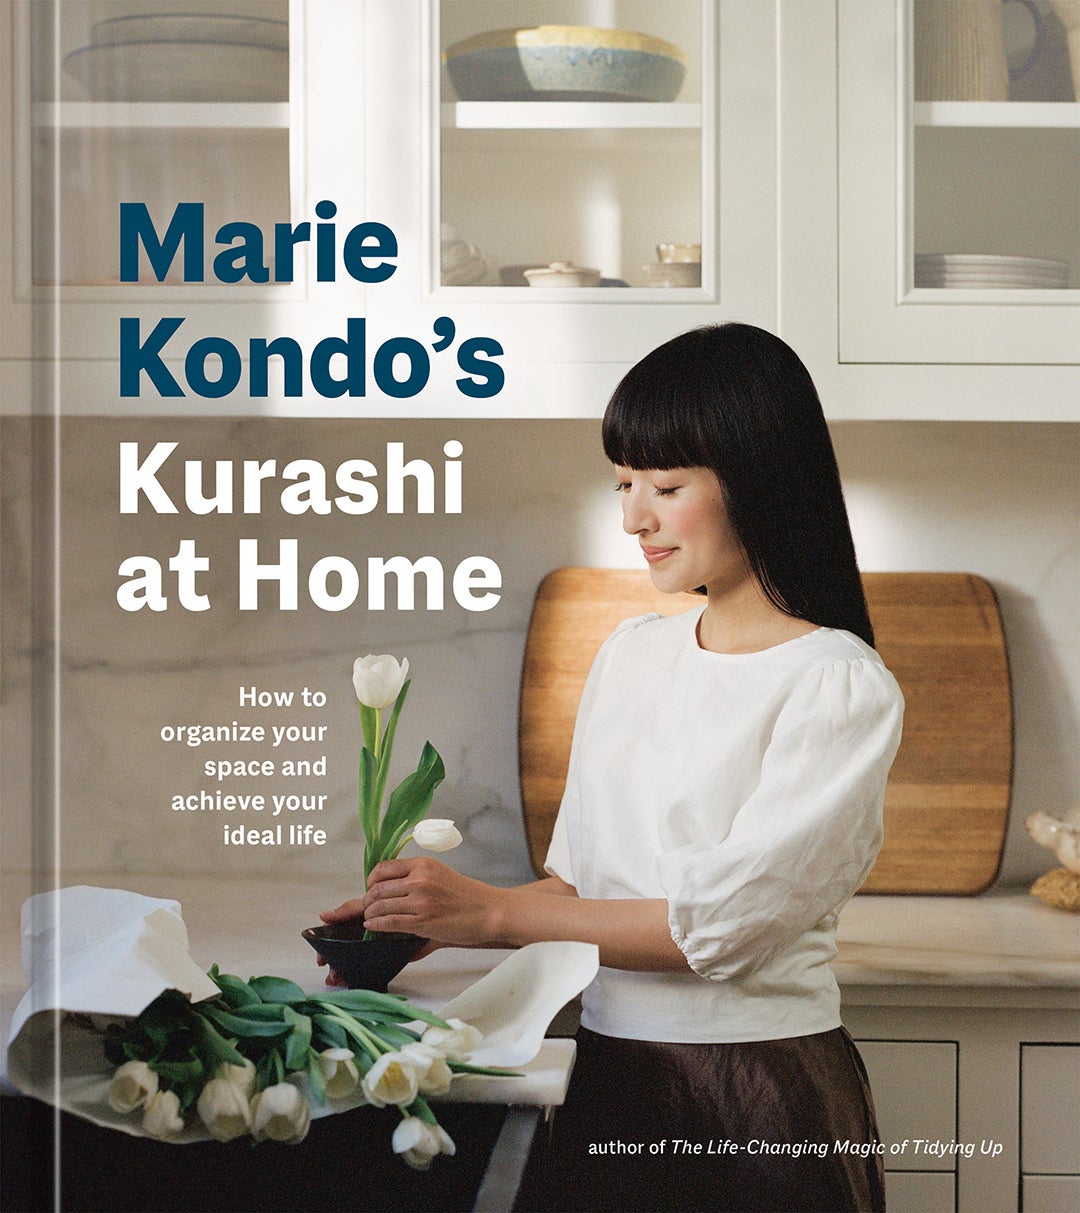 Marie Kondo’s Secret to an Overall Clean Home Is Tackling This Single Chore Every Day